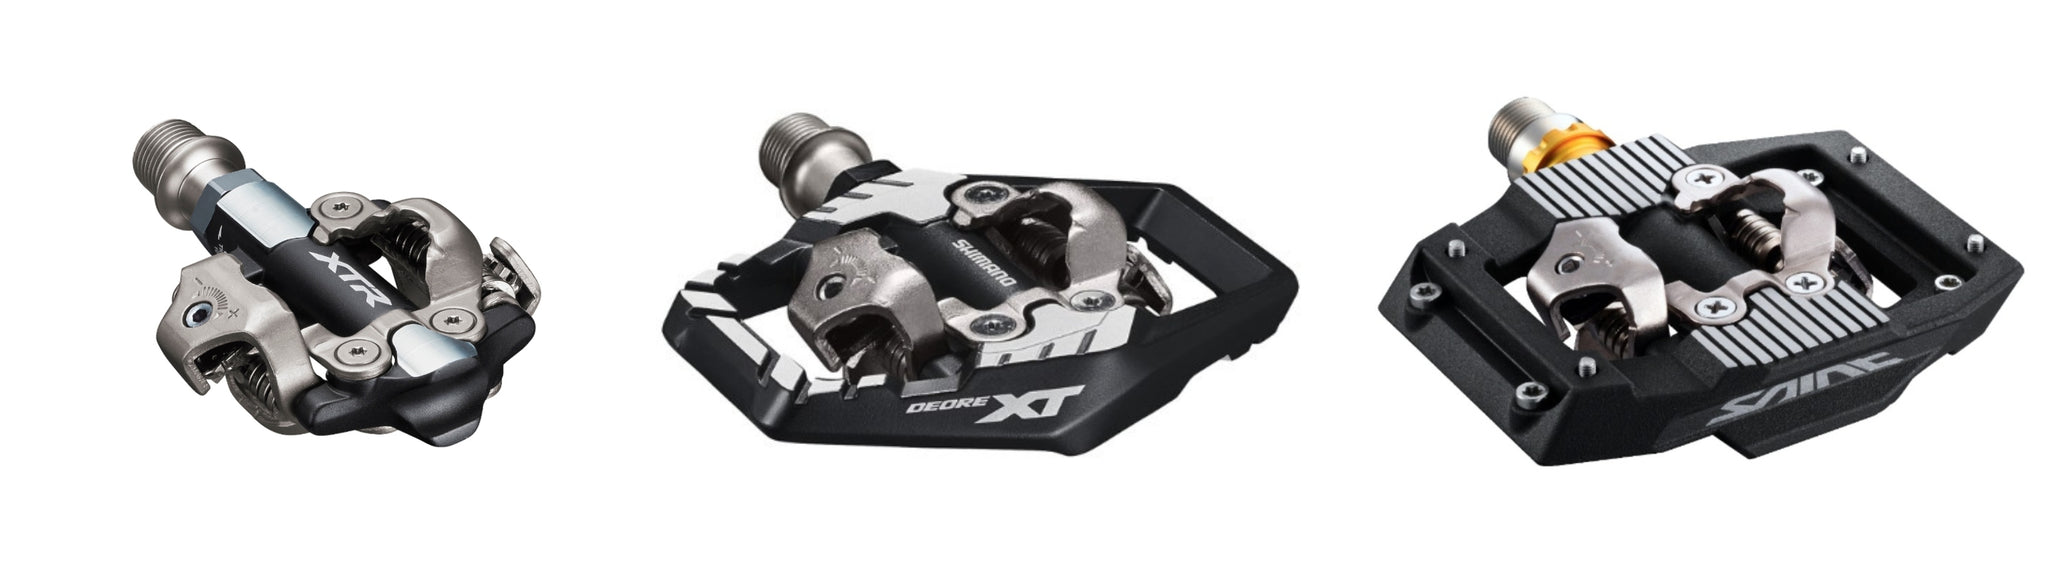 Shimano Clipless MTB pedals pros and cons